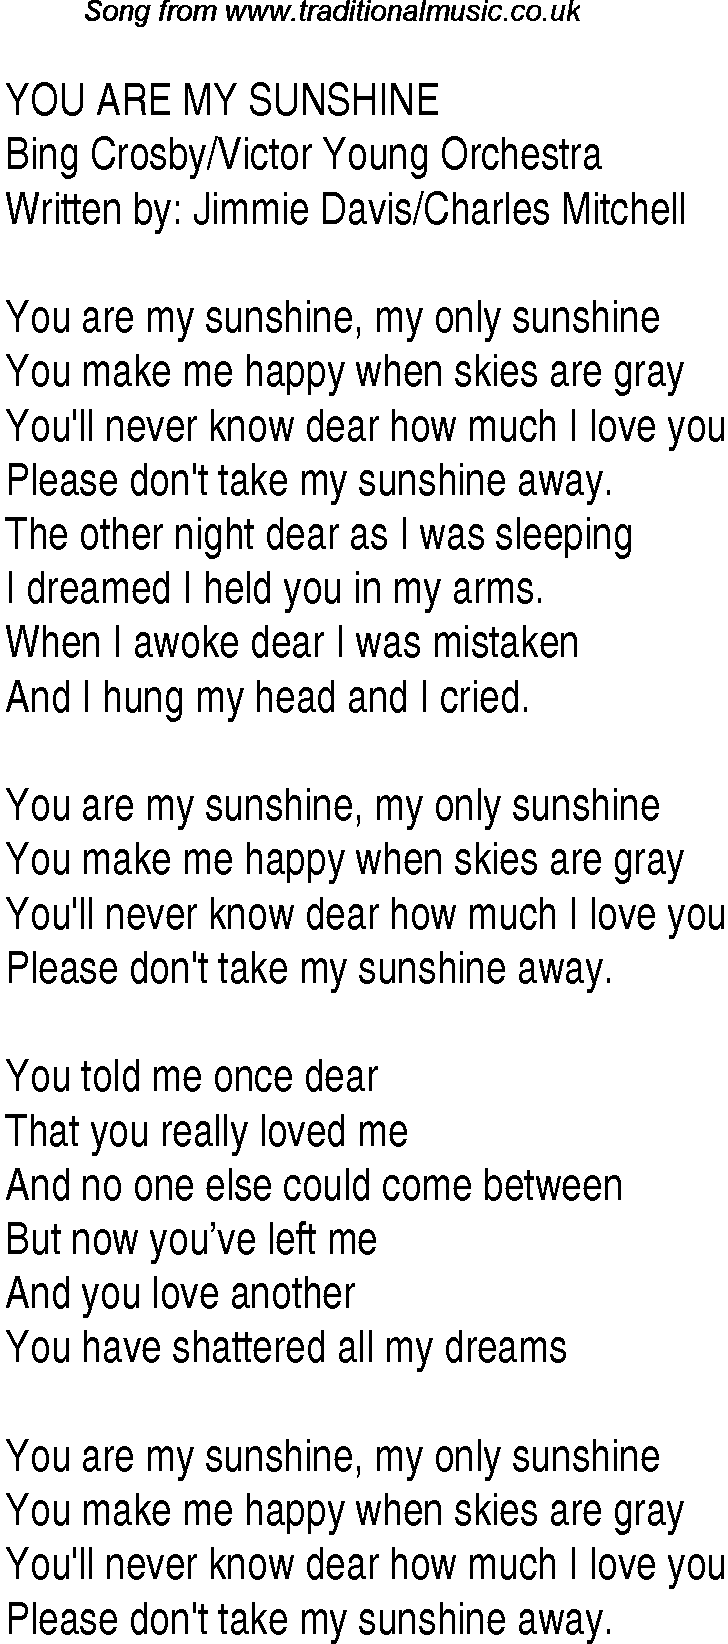 1940s top songs - lyrics for You Are My Sunshine